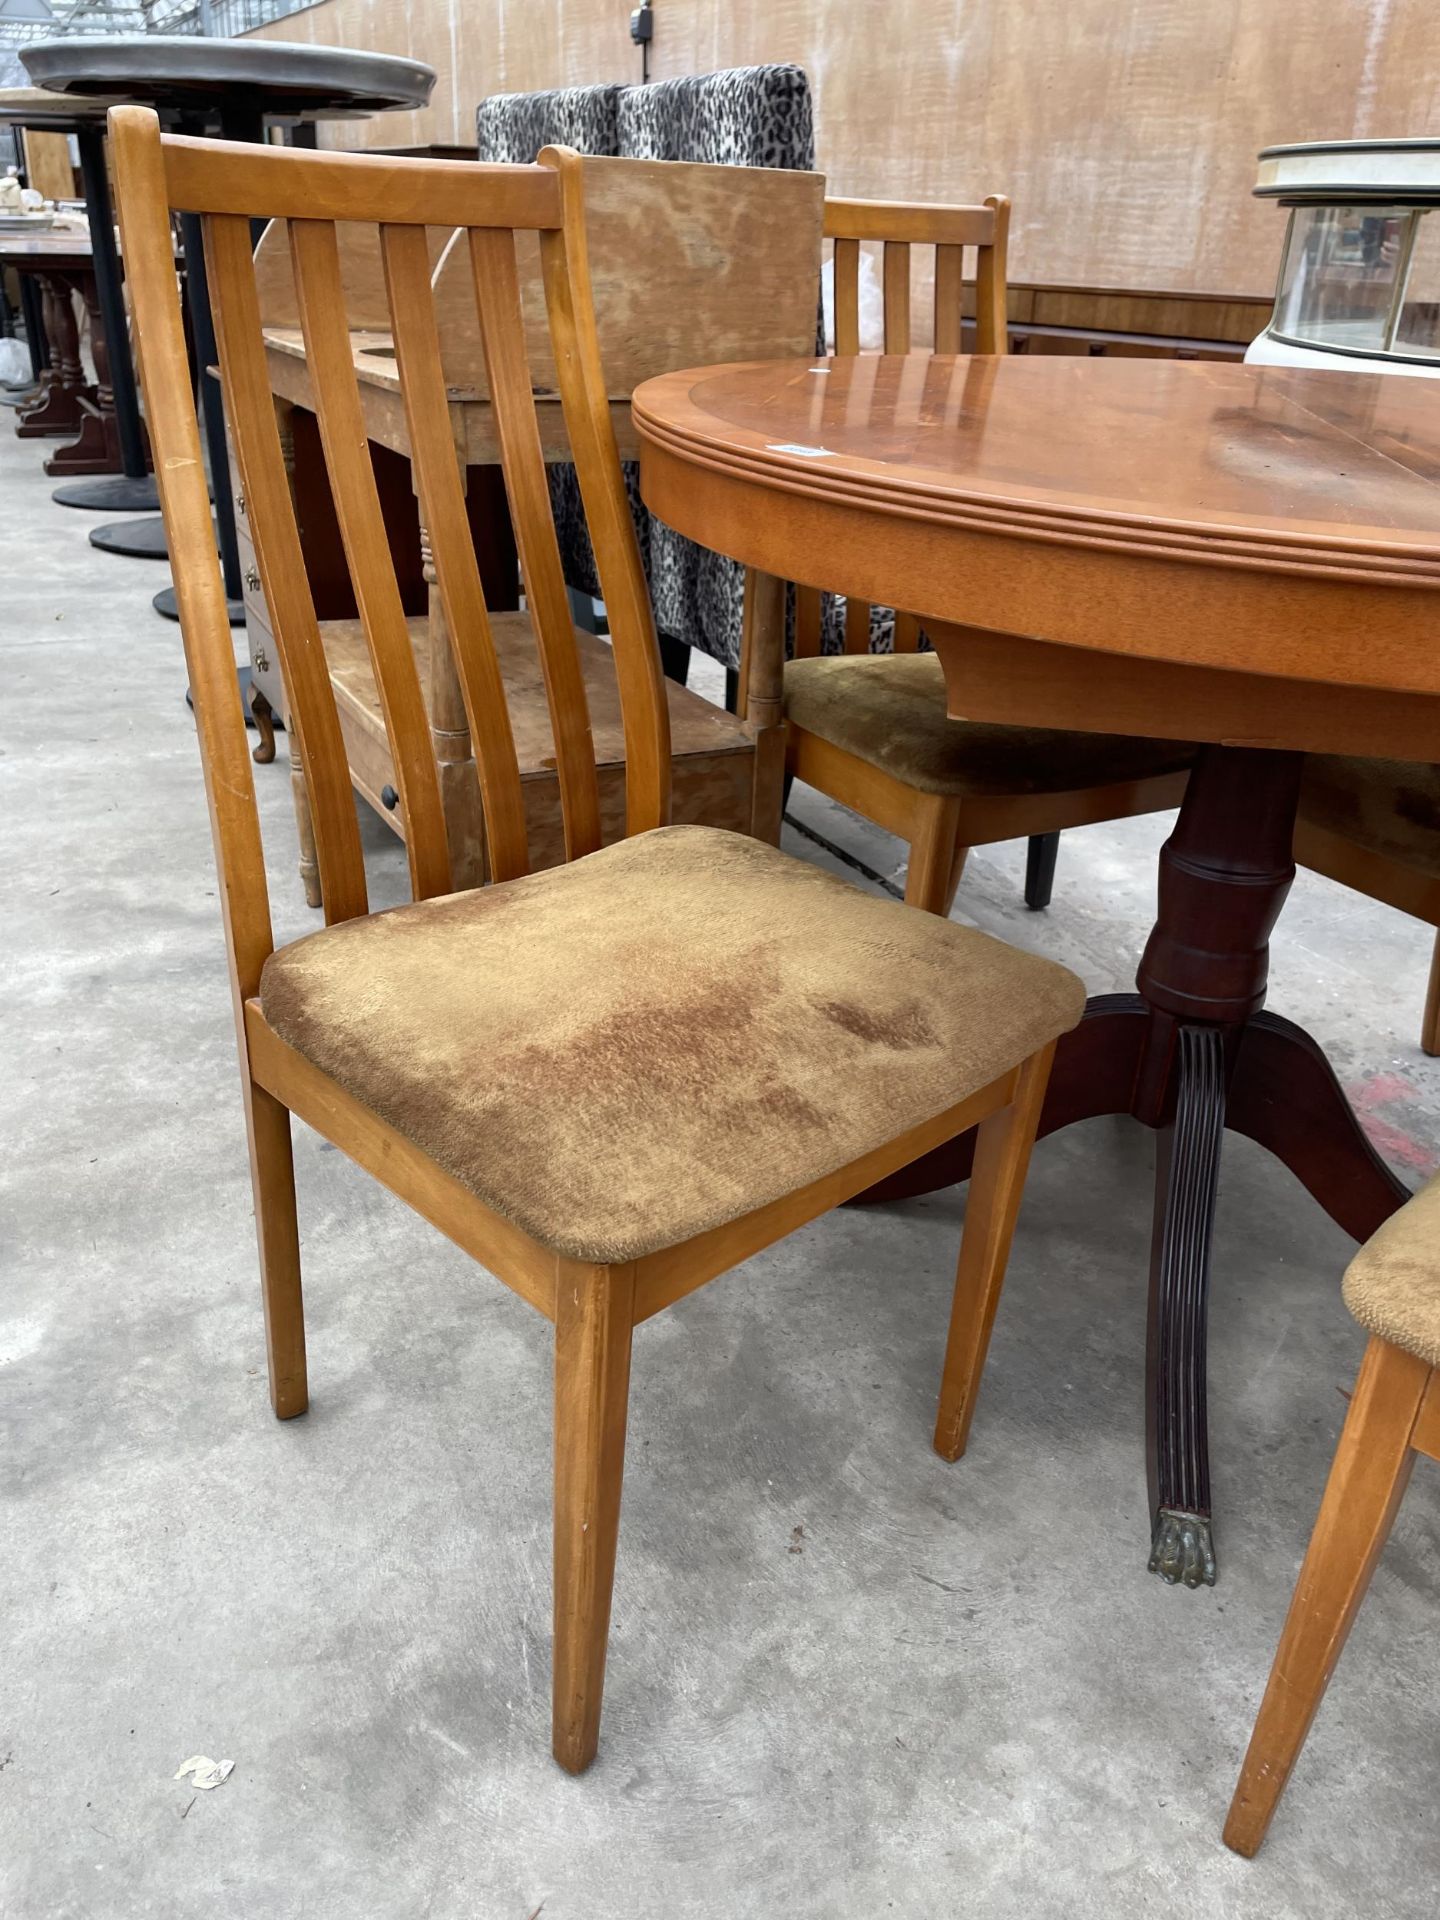 A YEW WOOD PEDESTAL DINING TABLE AND FOUR CHAIRS - Image 4 of 5